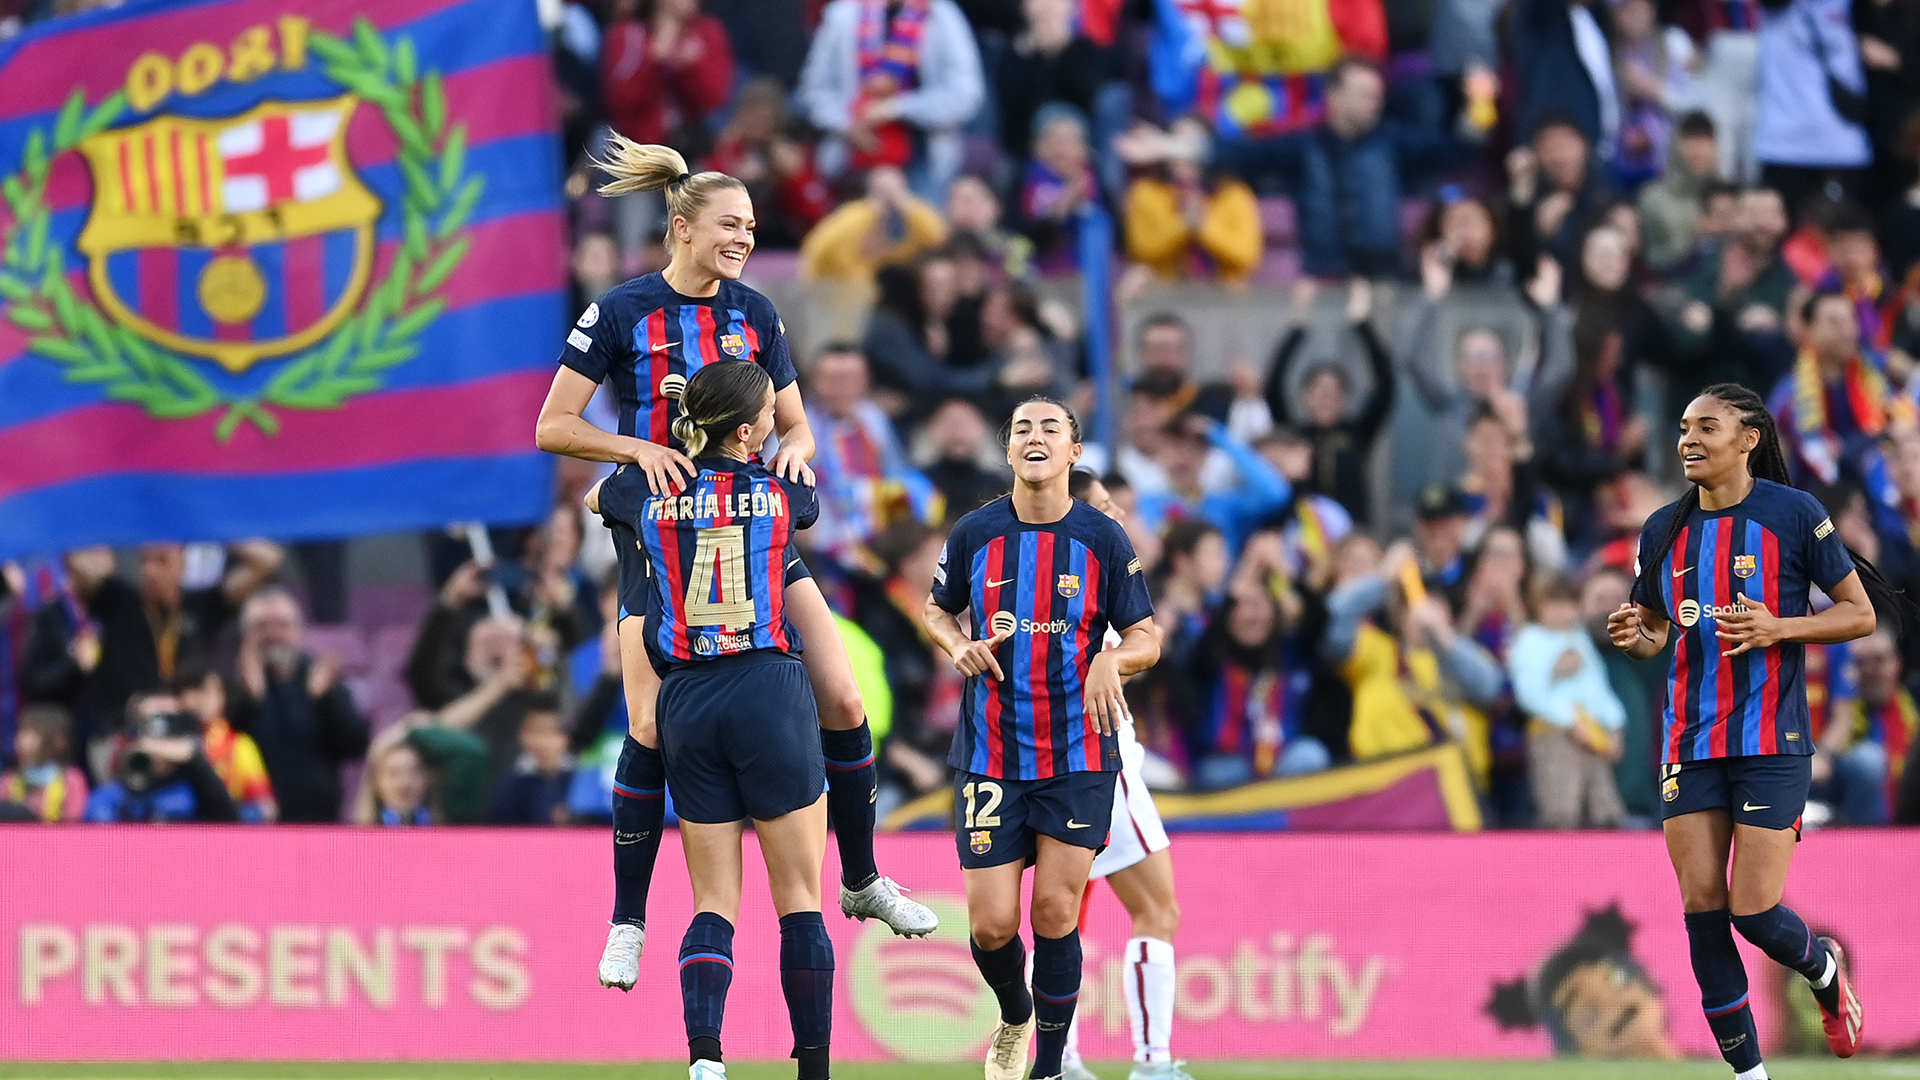 Mapi Leon of FC Barcelona celebrates with teammates after scoring the team's second goal during the UEFA Women's Champions League quarter-final 2nd leg match between FC Barcelona and AS Roma at Spotify Camp Nou on March 29, 2023 in Barcelona, Spain.